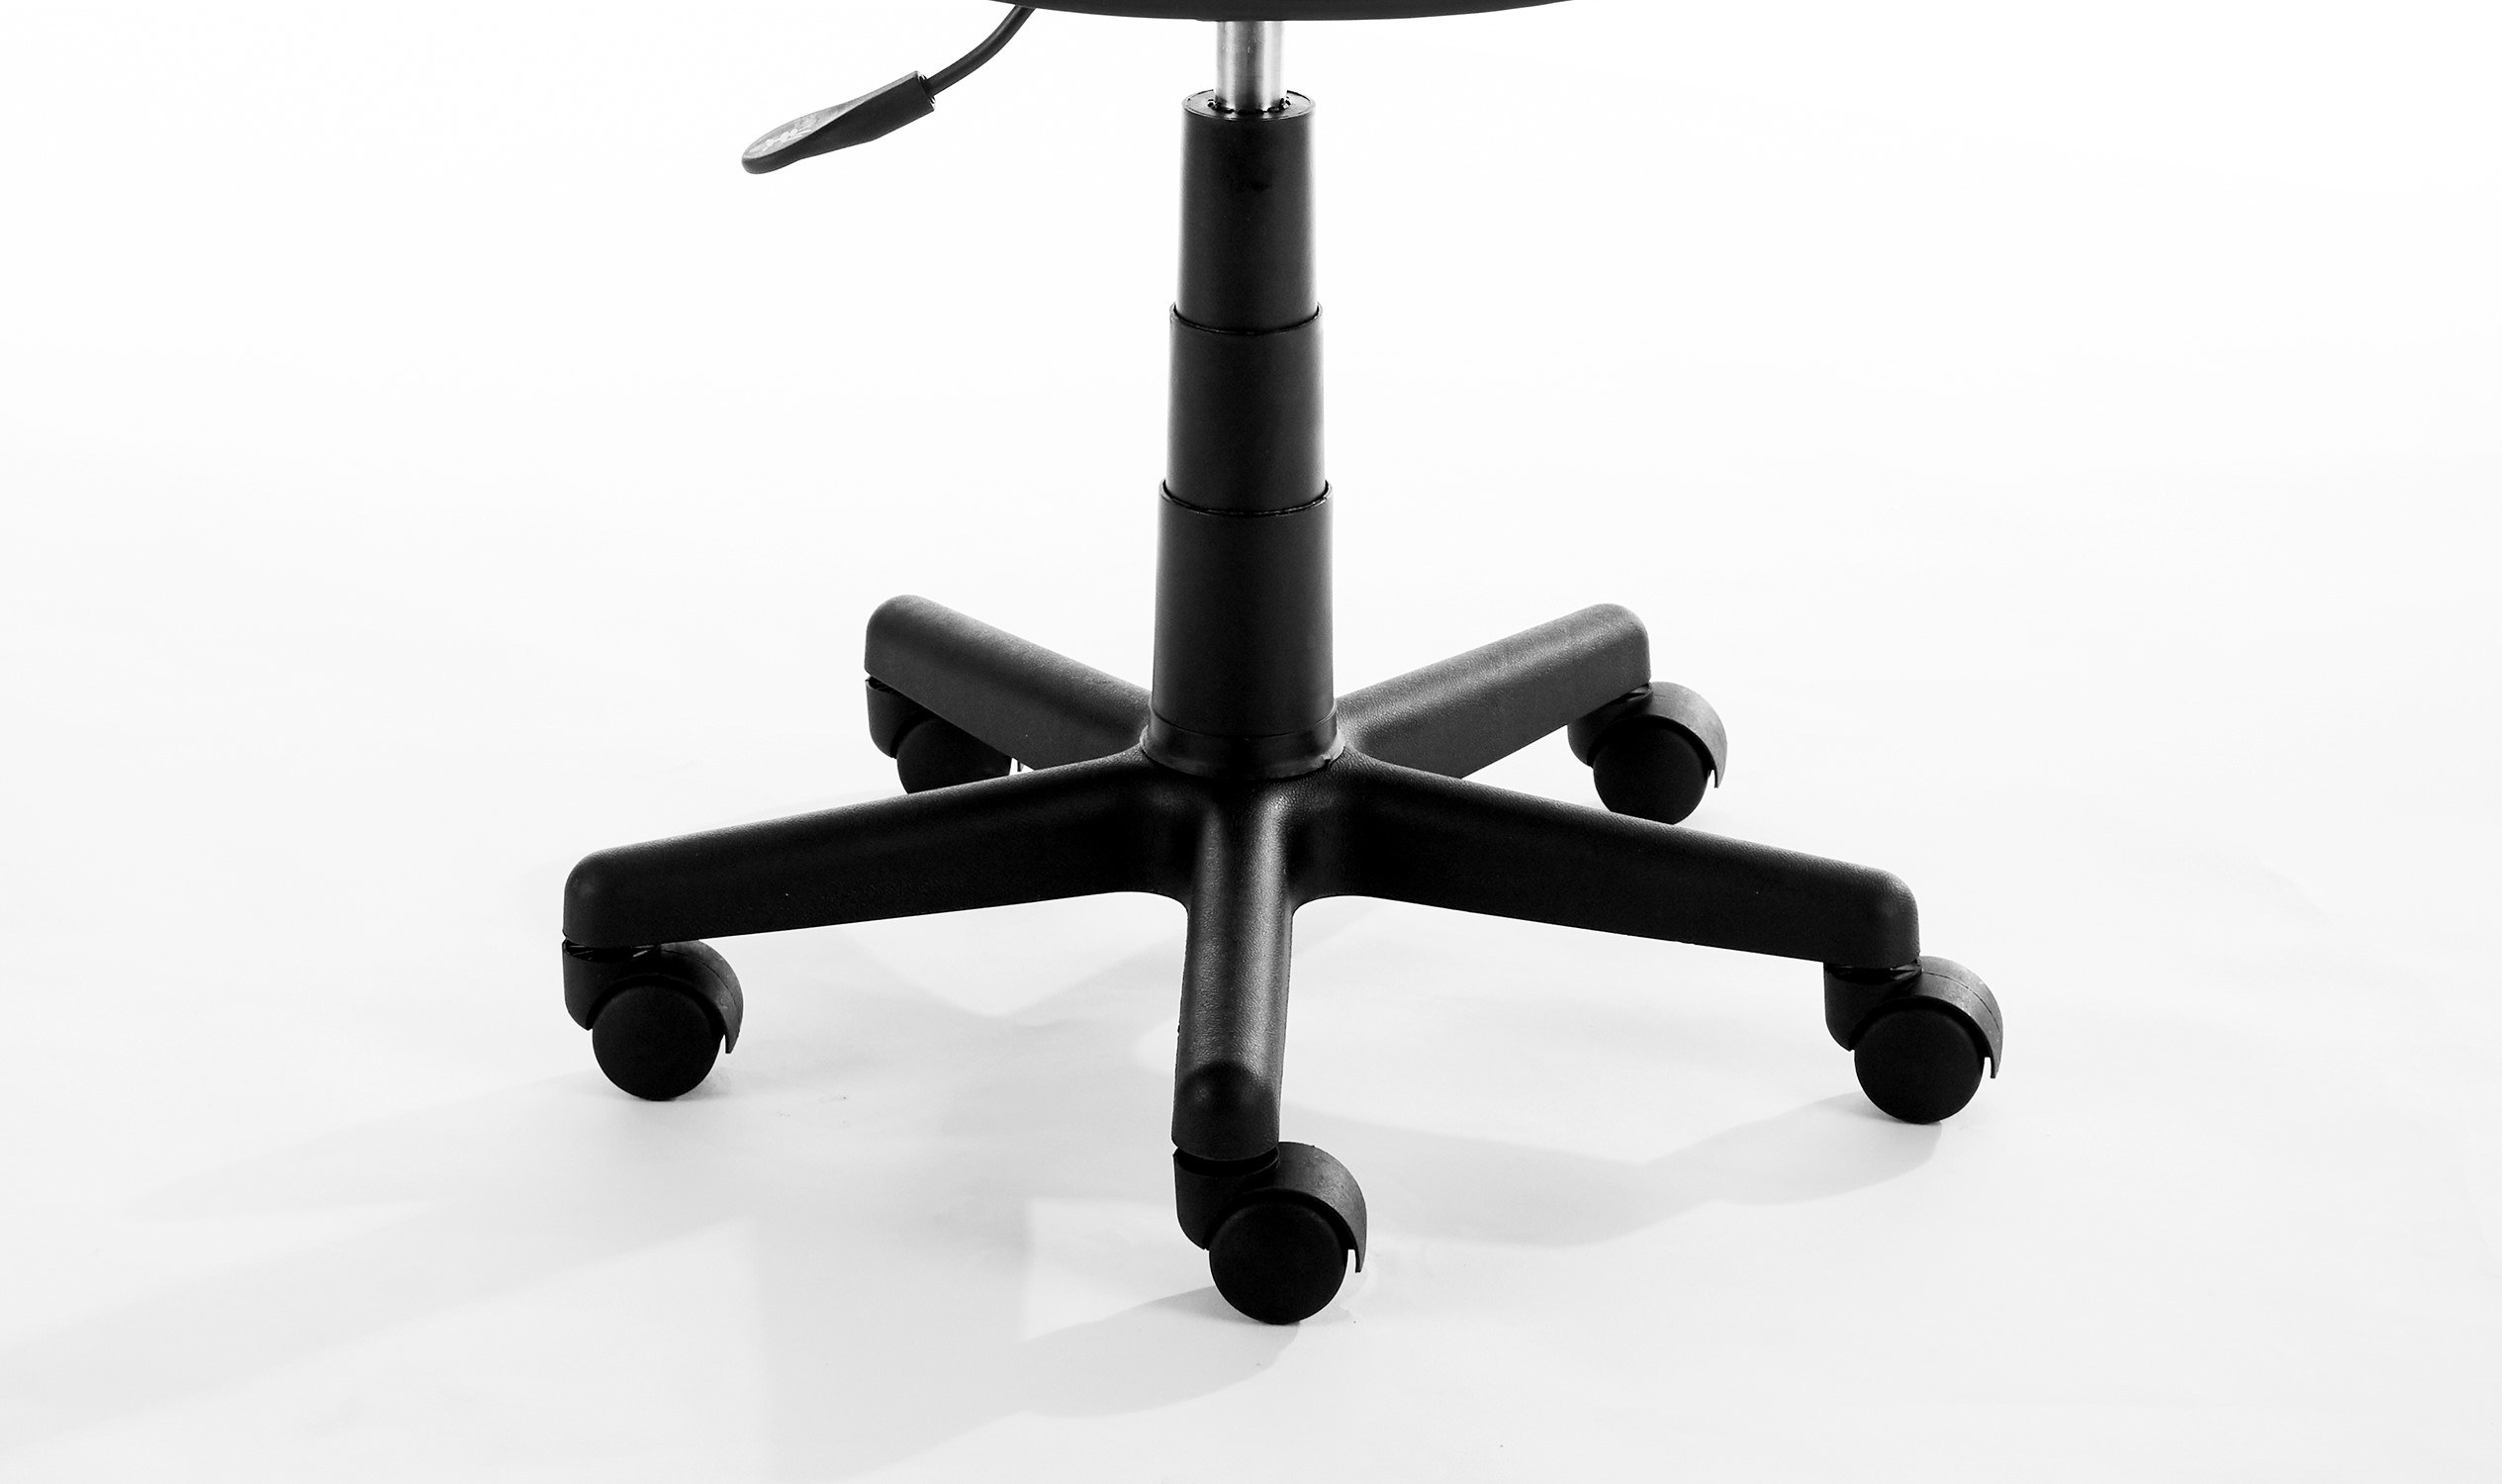 Urban Shop Task Chair with Adjustable Height & Swivel, 225 lb. Capacity, Multiple Colors - image 2 of 5